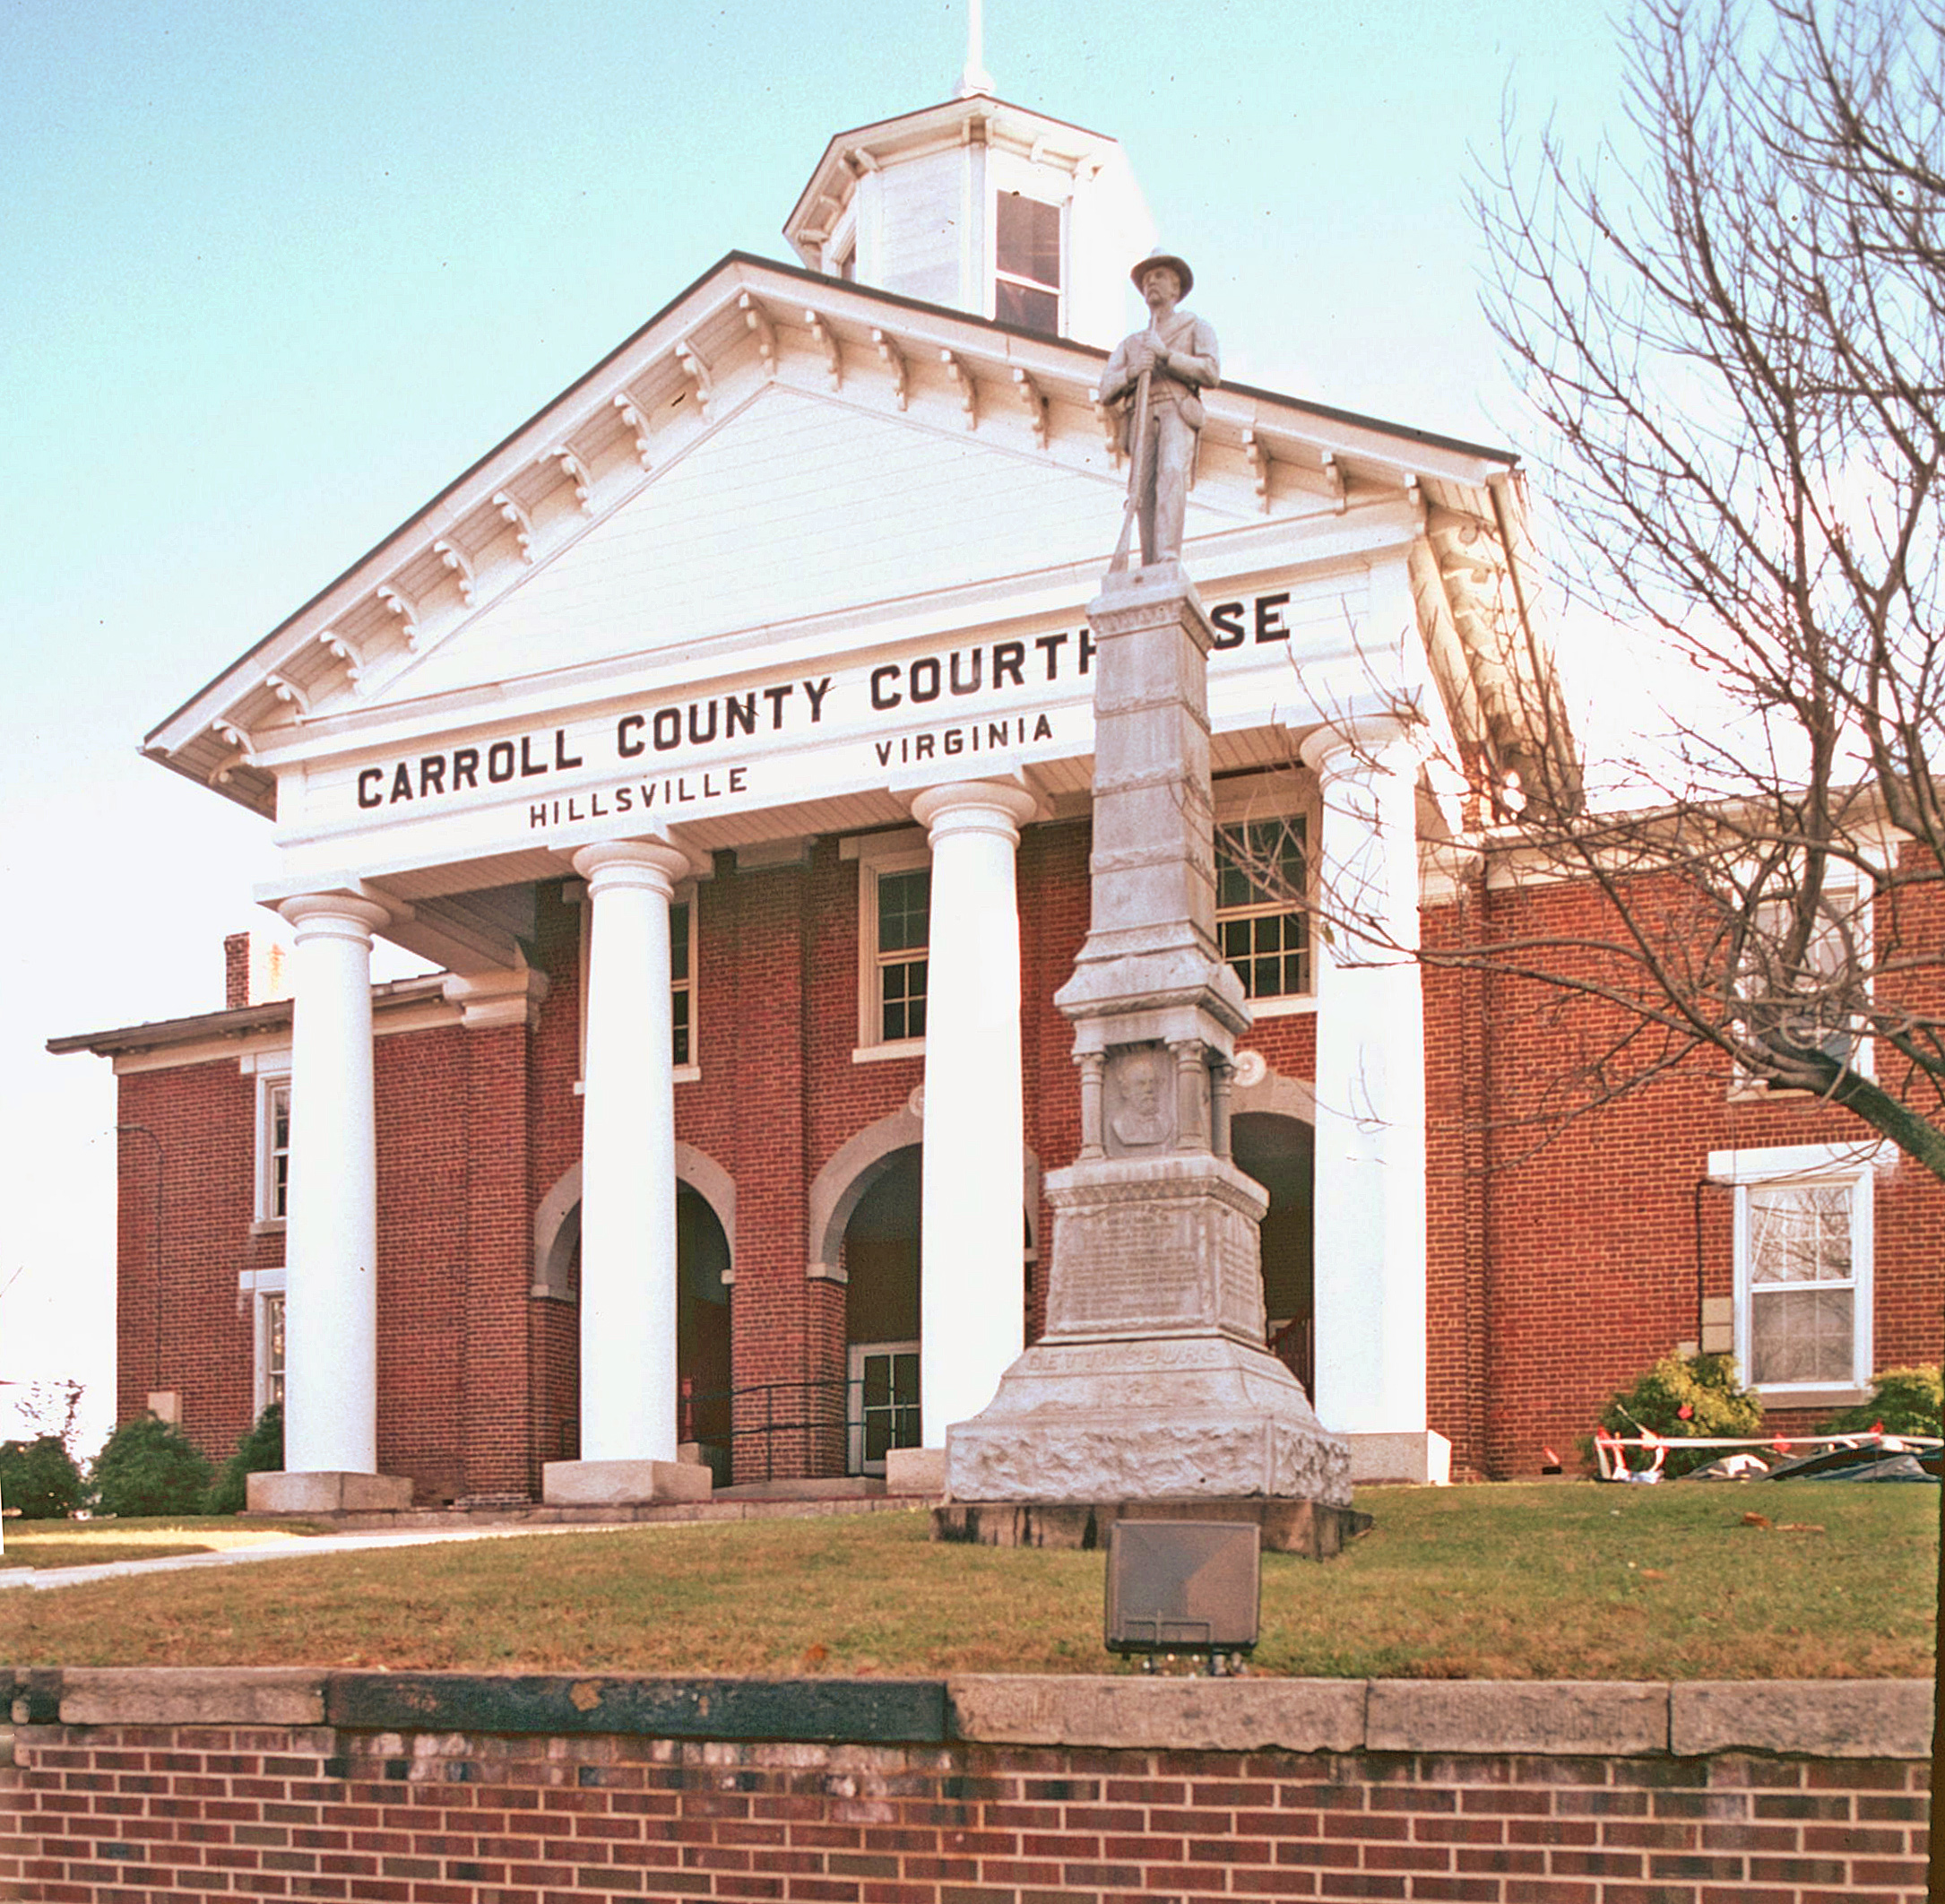 237-0001_Carroll_County_Courthouse_2000_exterior_front_elevation_VLR_Online